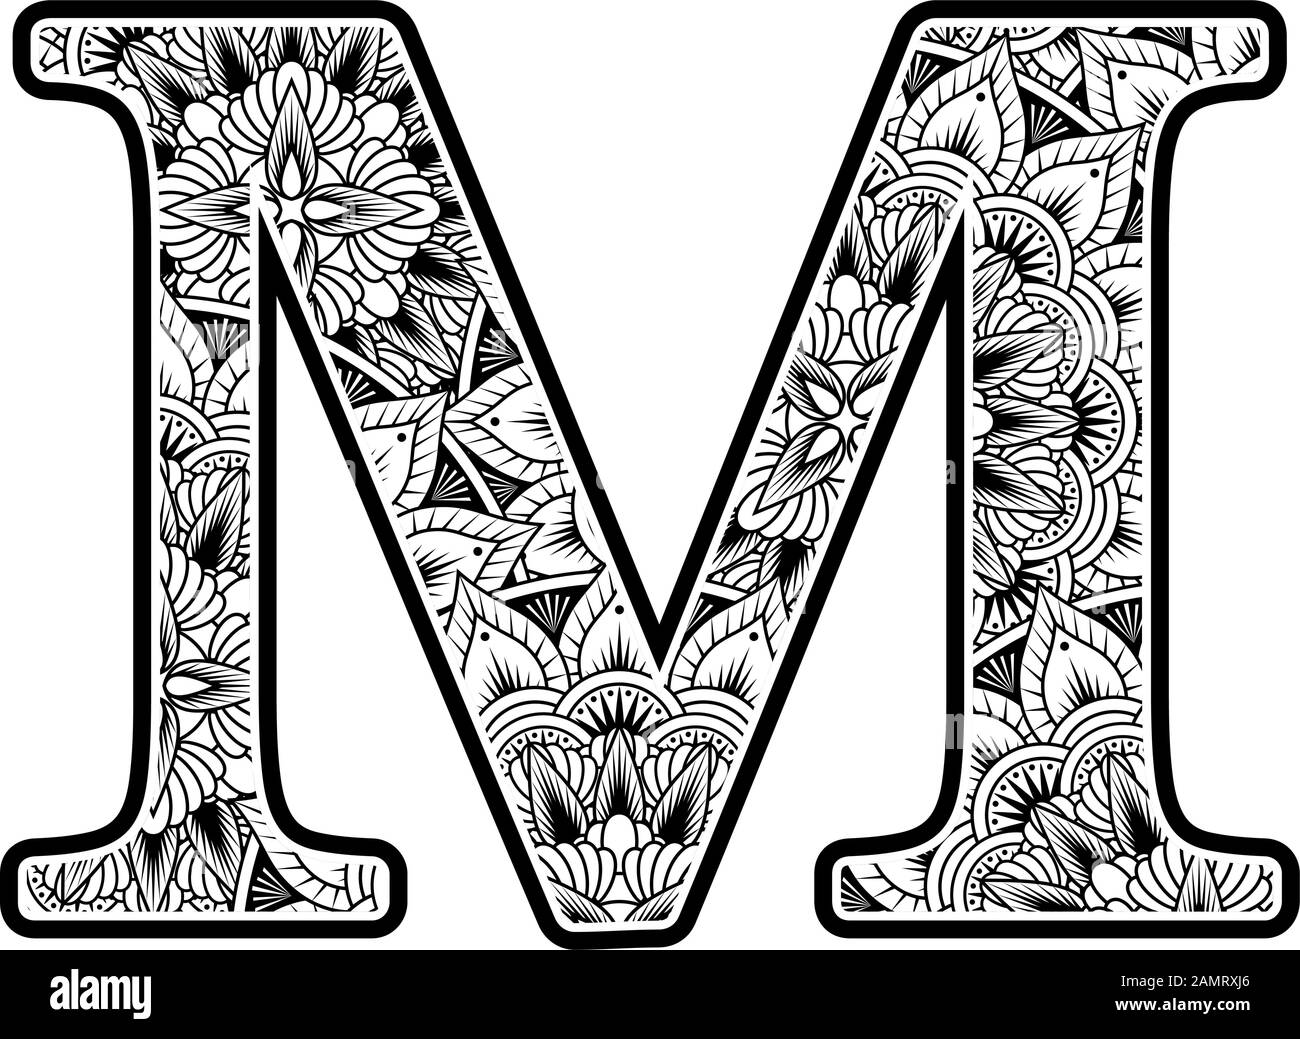 capital letter m with abstract flowers ornaments in black and white. design inspired from mandala art style for coloring. Isolated on white background Stock Vector